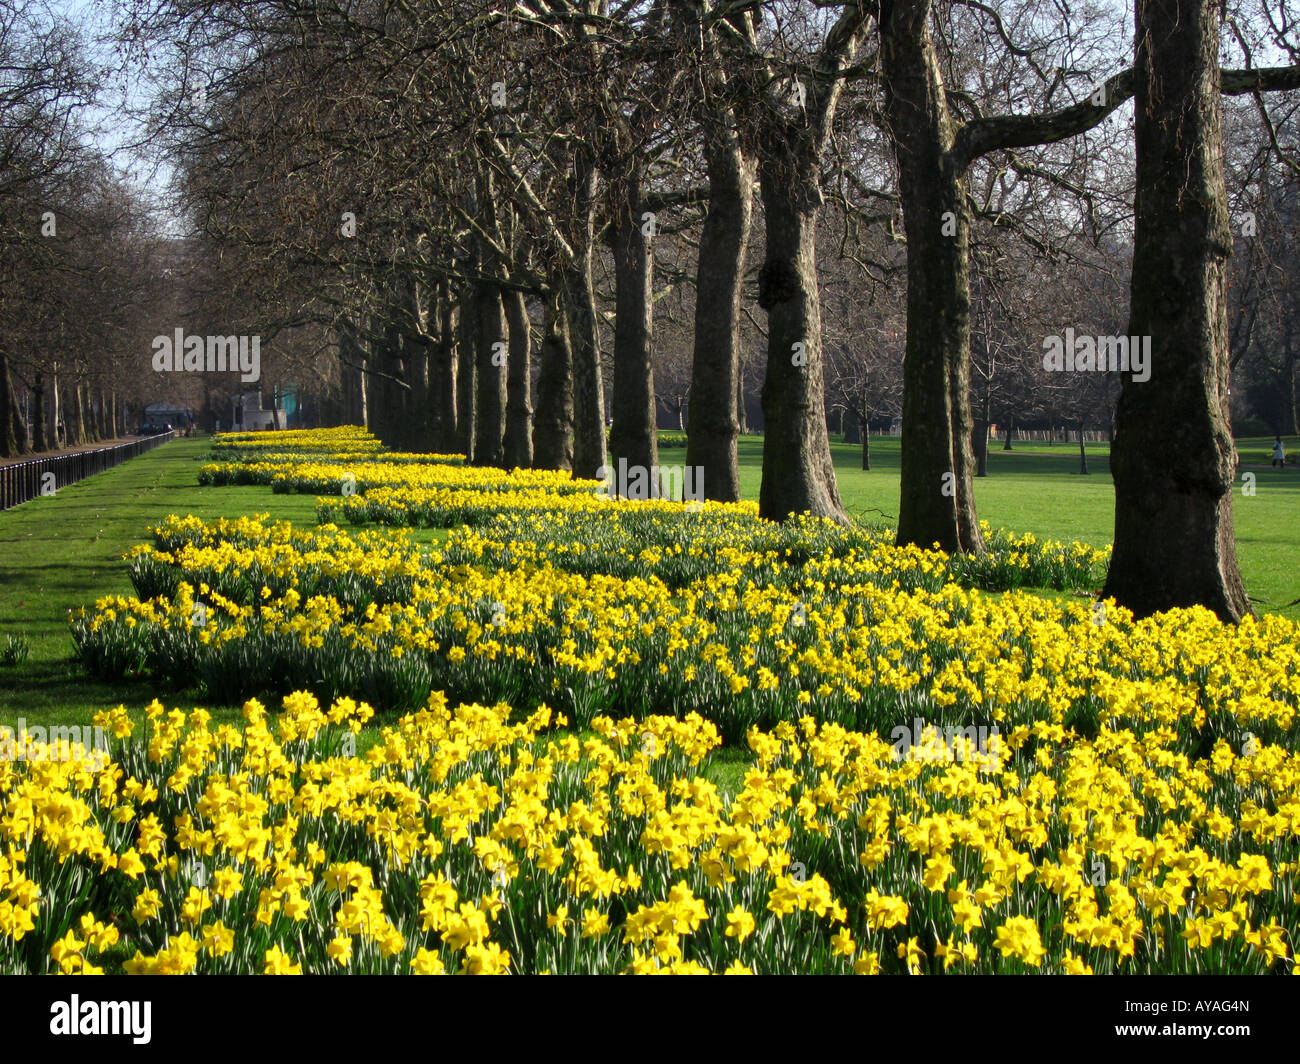 Daffodils flowering in Spring alongside The Mall City of Westminster London England UK Stock Photo